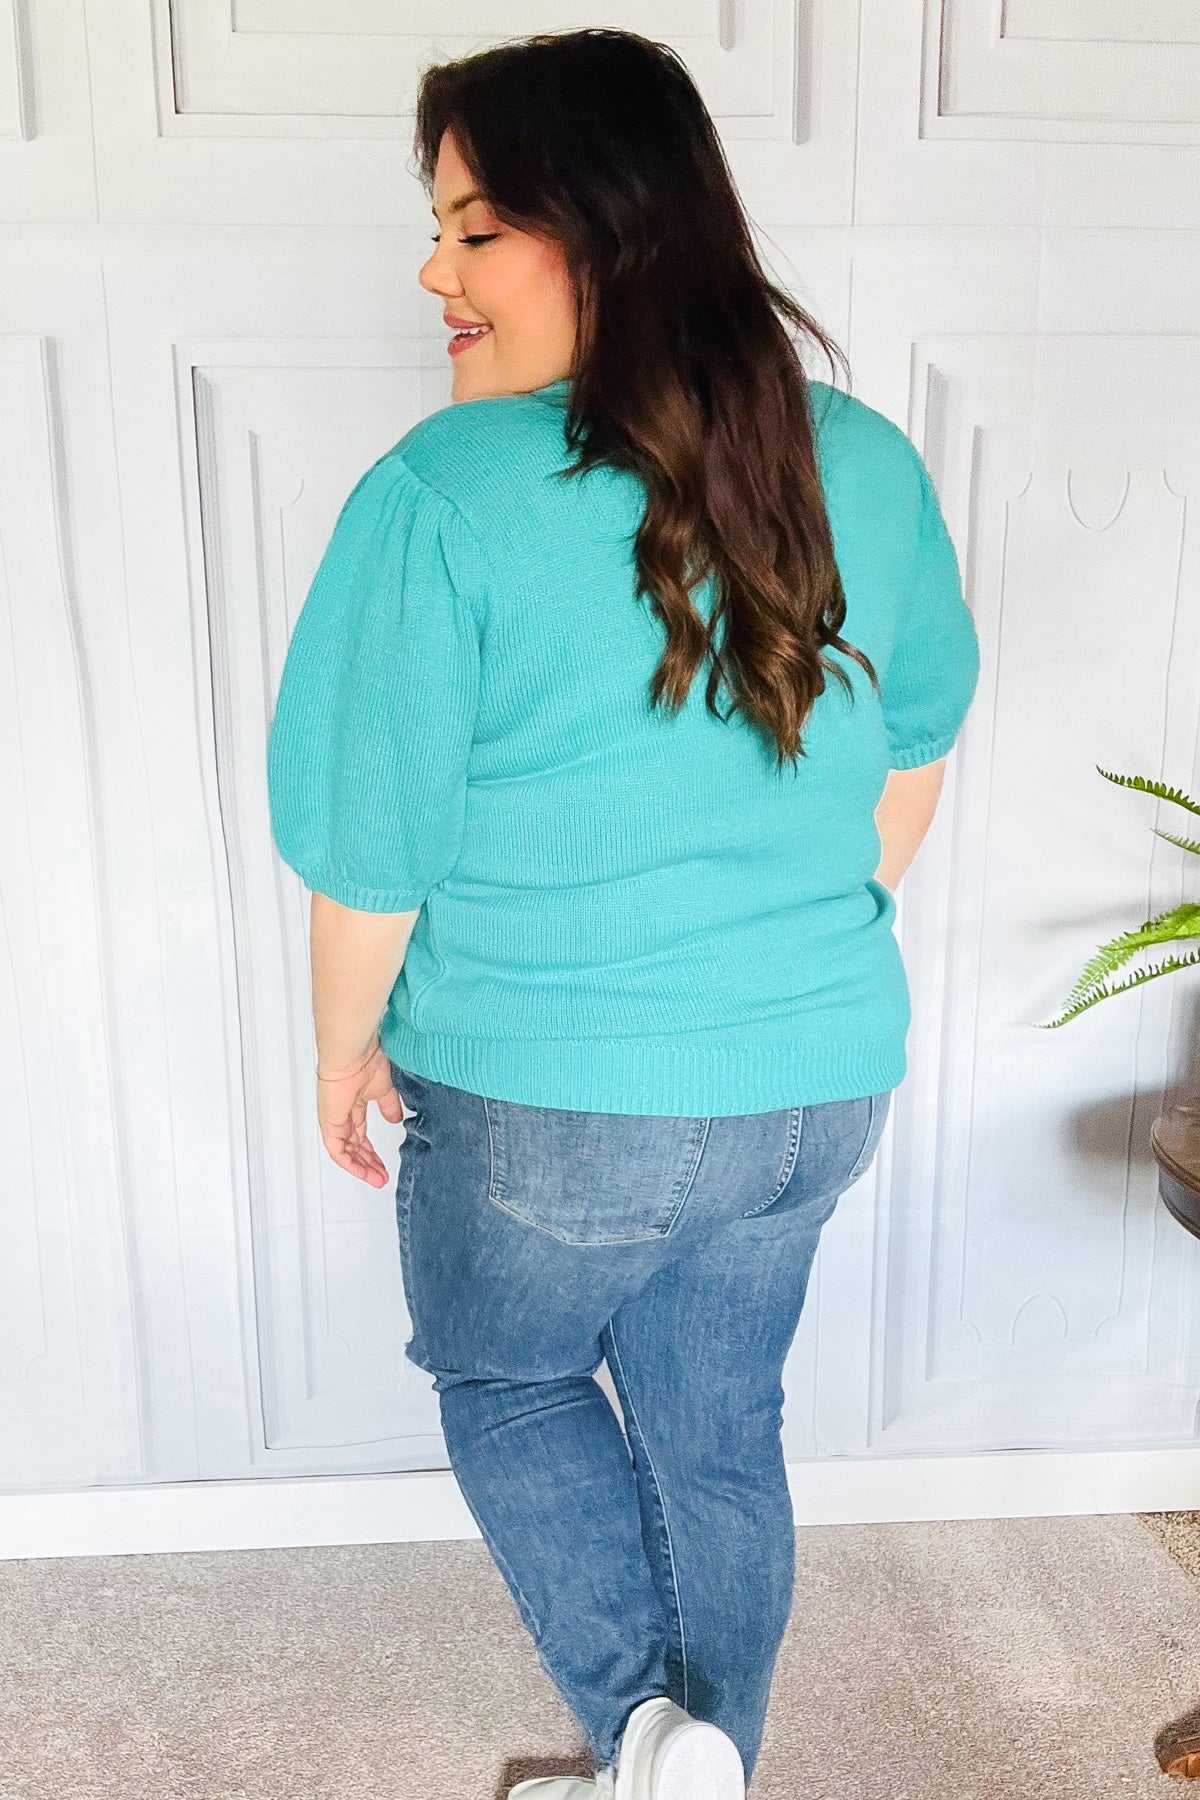 Take A Bow Mint "Mama" Embroidery Pop-Up Puff Sleeve Sweater Top